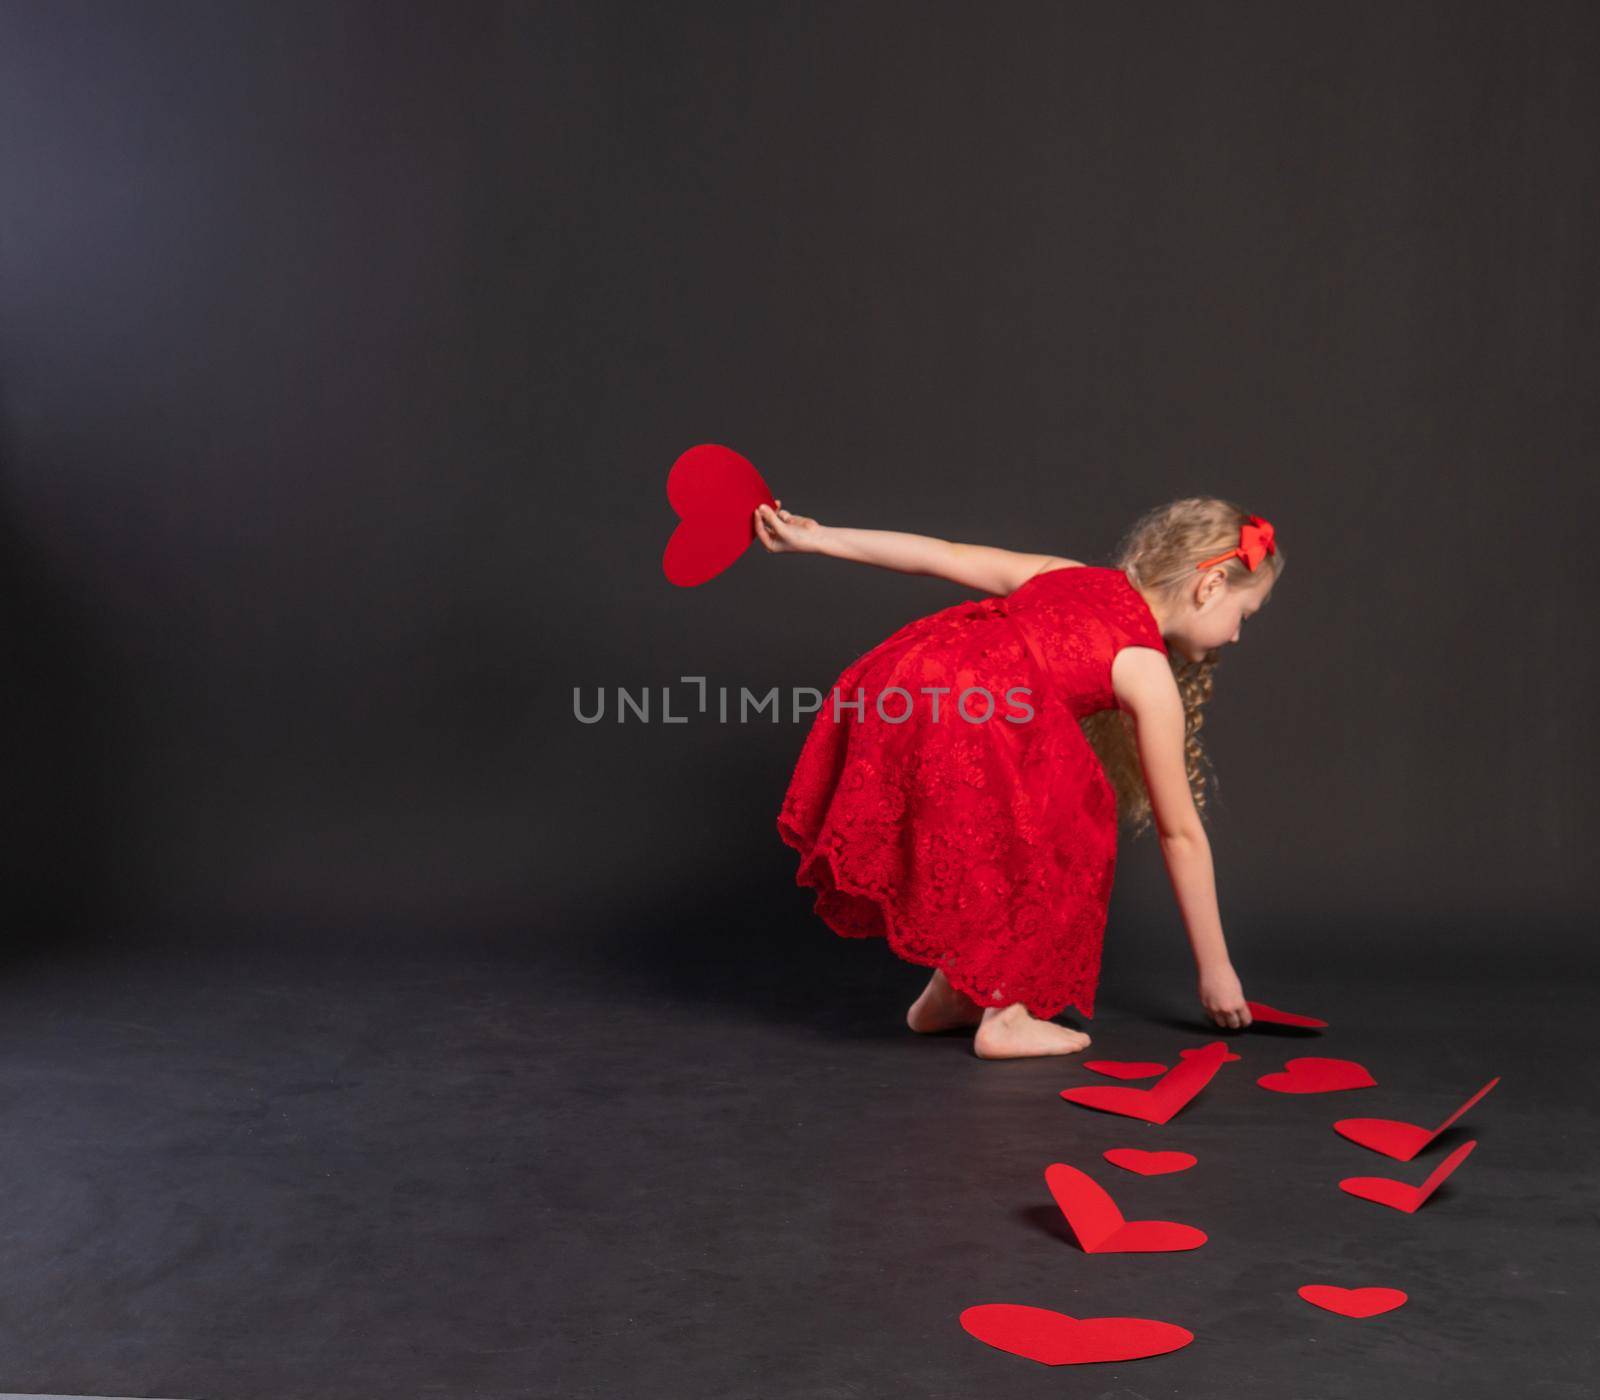 paper hearts love symbol, valentine's board, on the floor hearts married space. February 14, the honeymoon. a gift in a red dress girl, barefoot by 89167702191